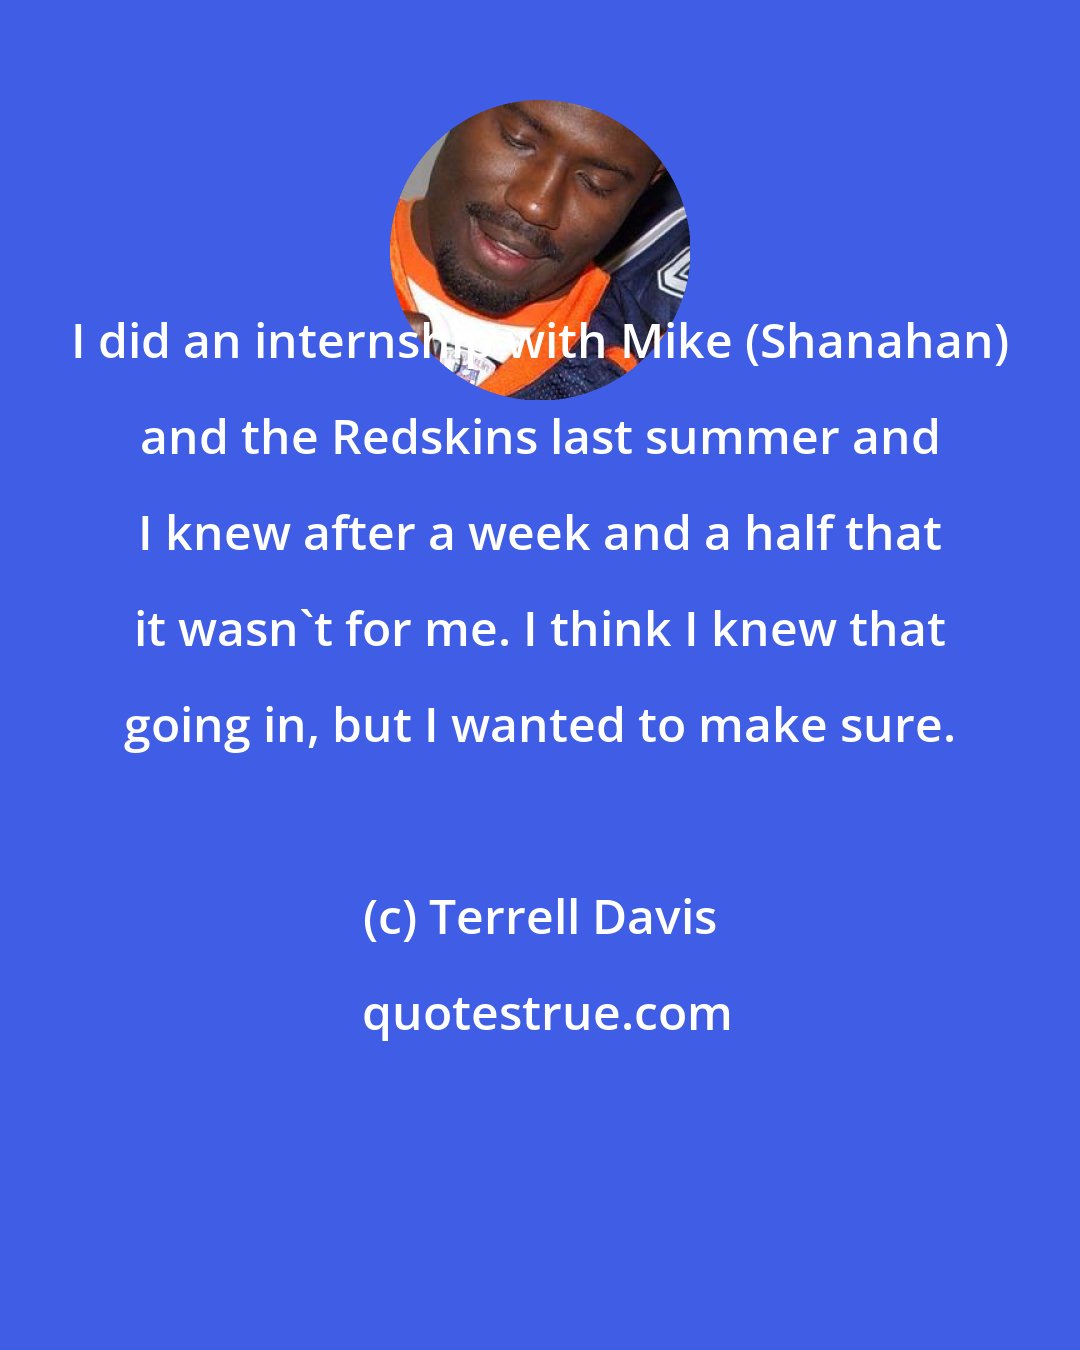 Terrell Davis: I did an internship with Mike (Shanahan) and the Redskins last summer and I knew after a week and a half that it wasn't for me. I think I knew that going in, but I wanted to make sure.